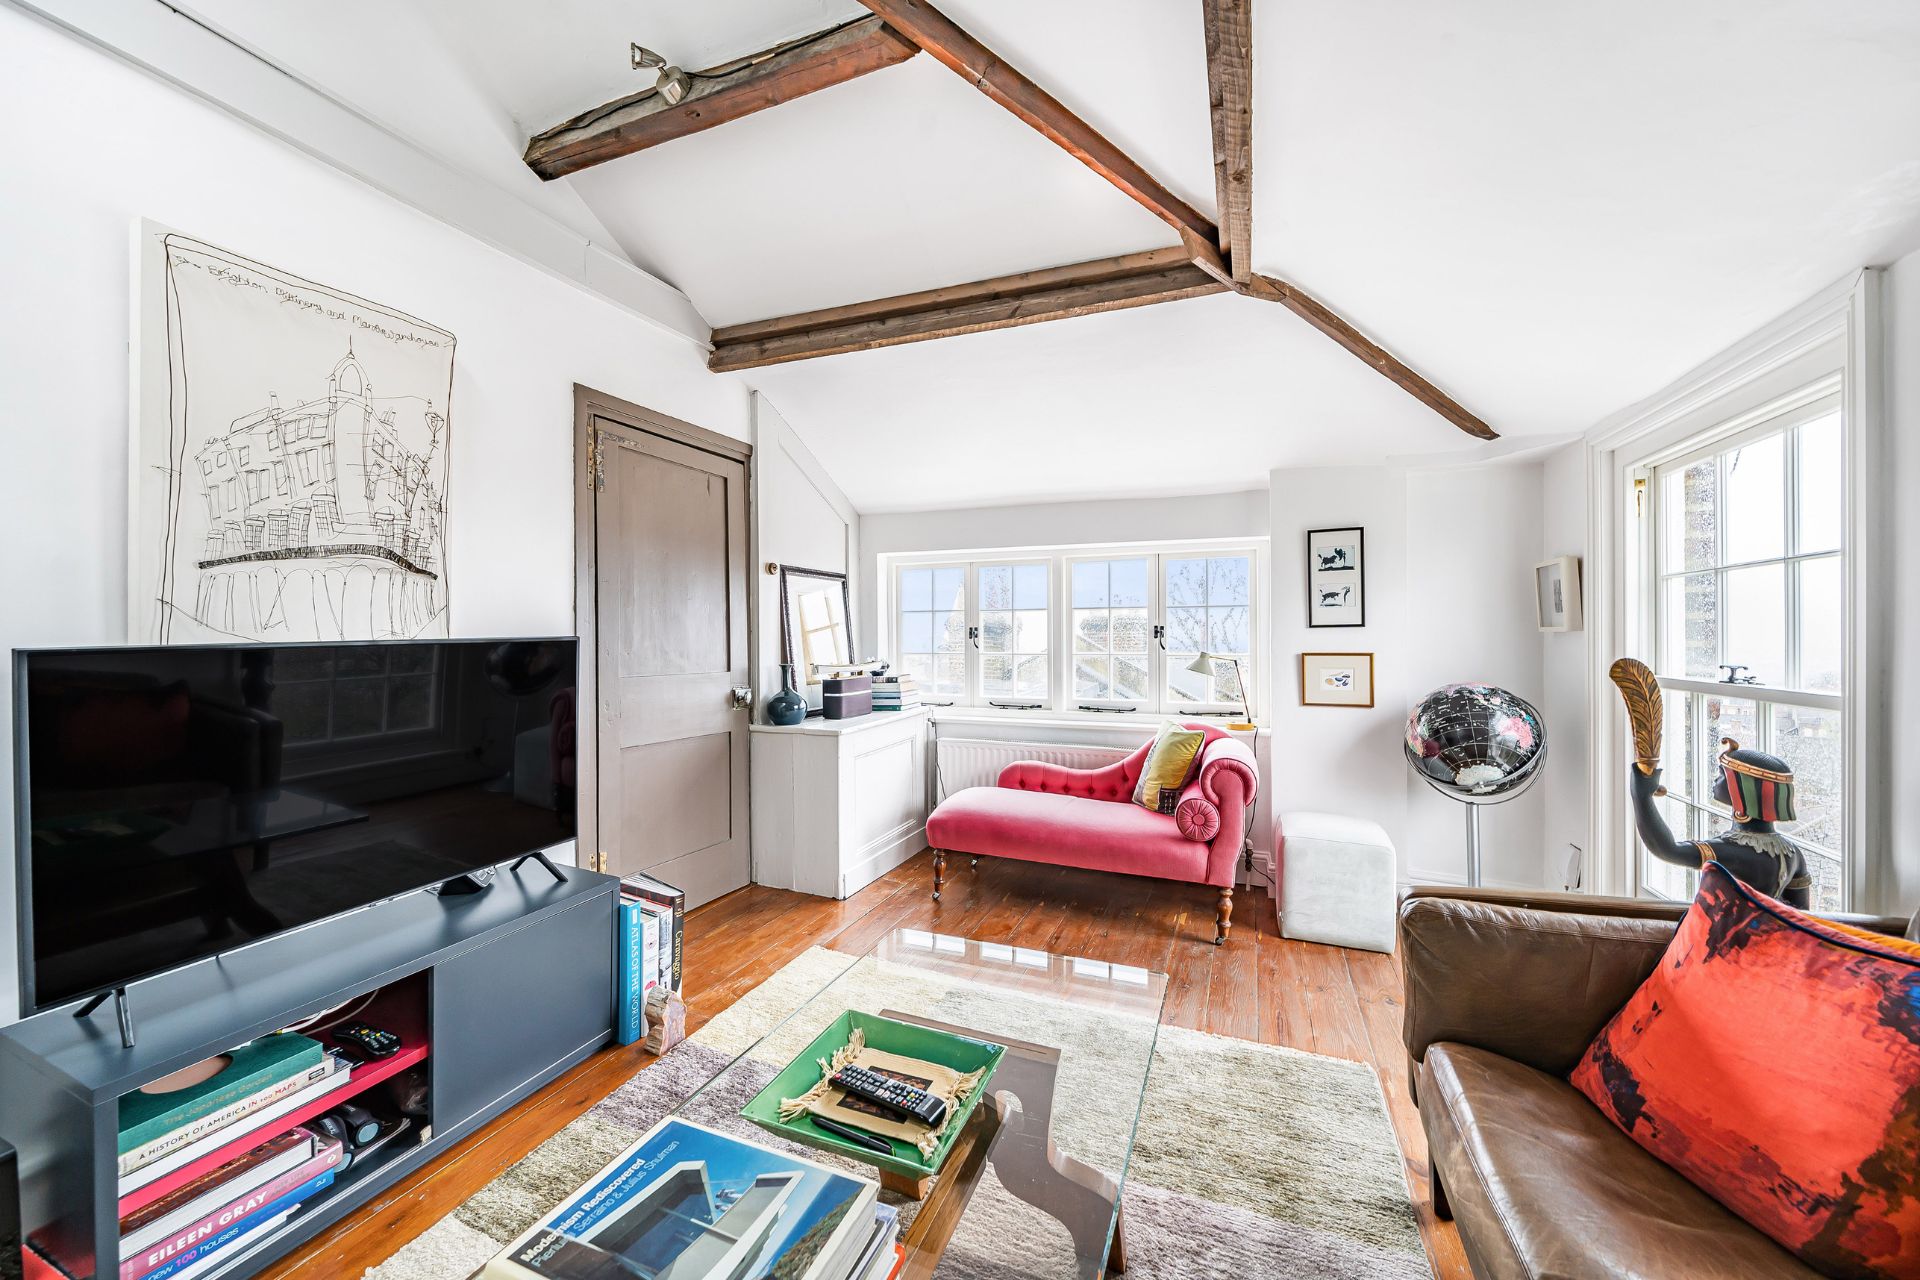 Hampstead home with wooden ceiling beams and red sofas.